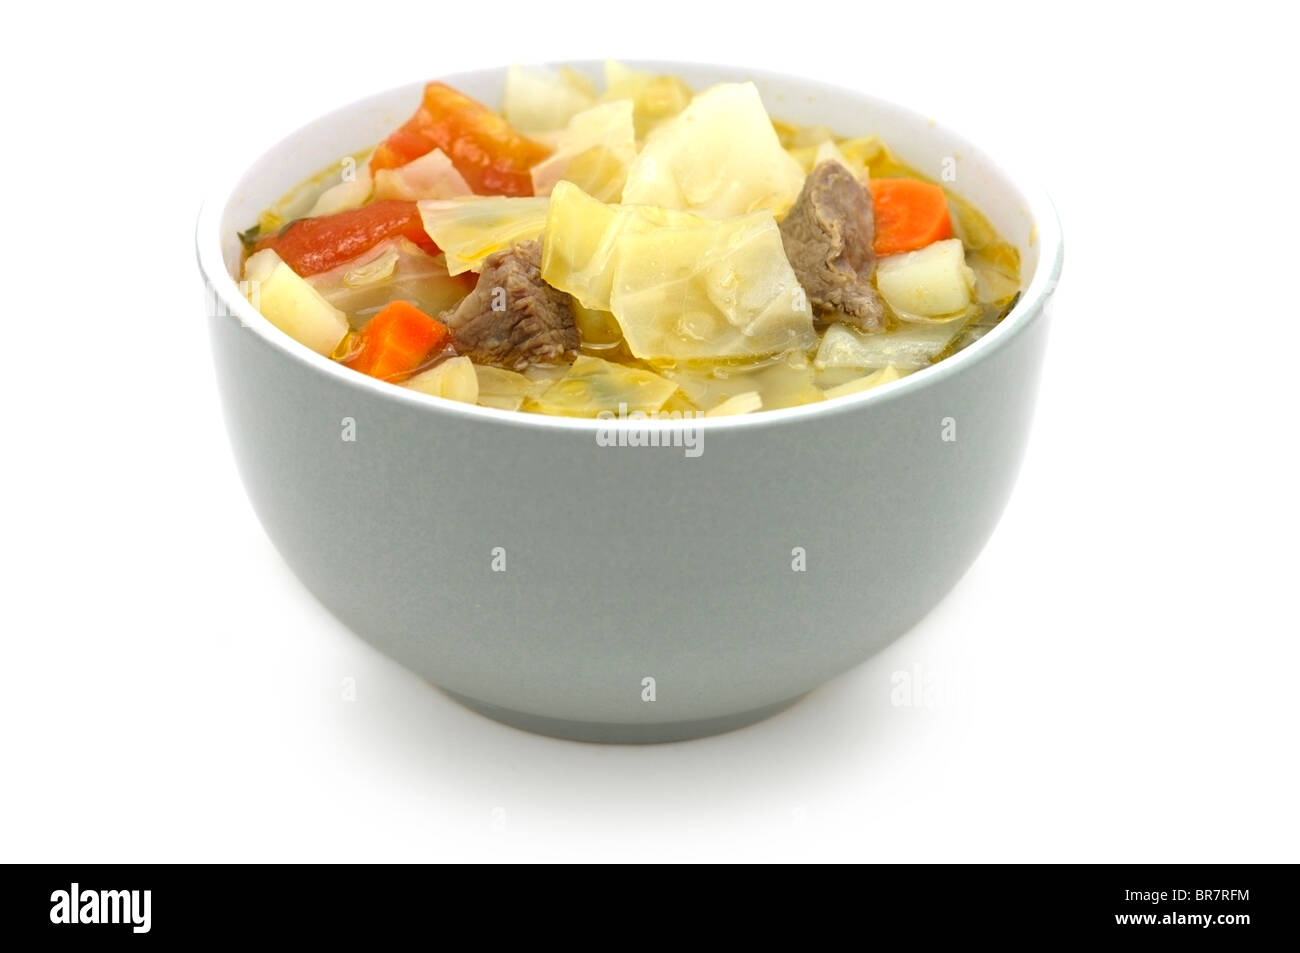 Cabbage Soup (Cabbage, Beef, Carrots, Potatoes, Tomatoes, Parsley) Stock Photo